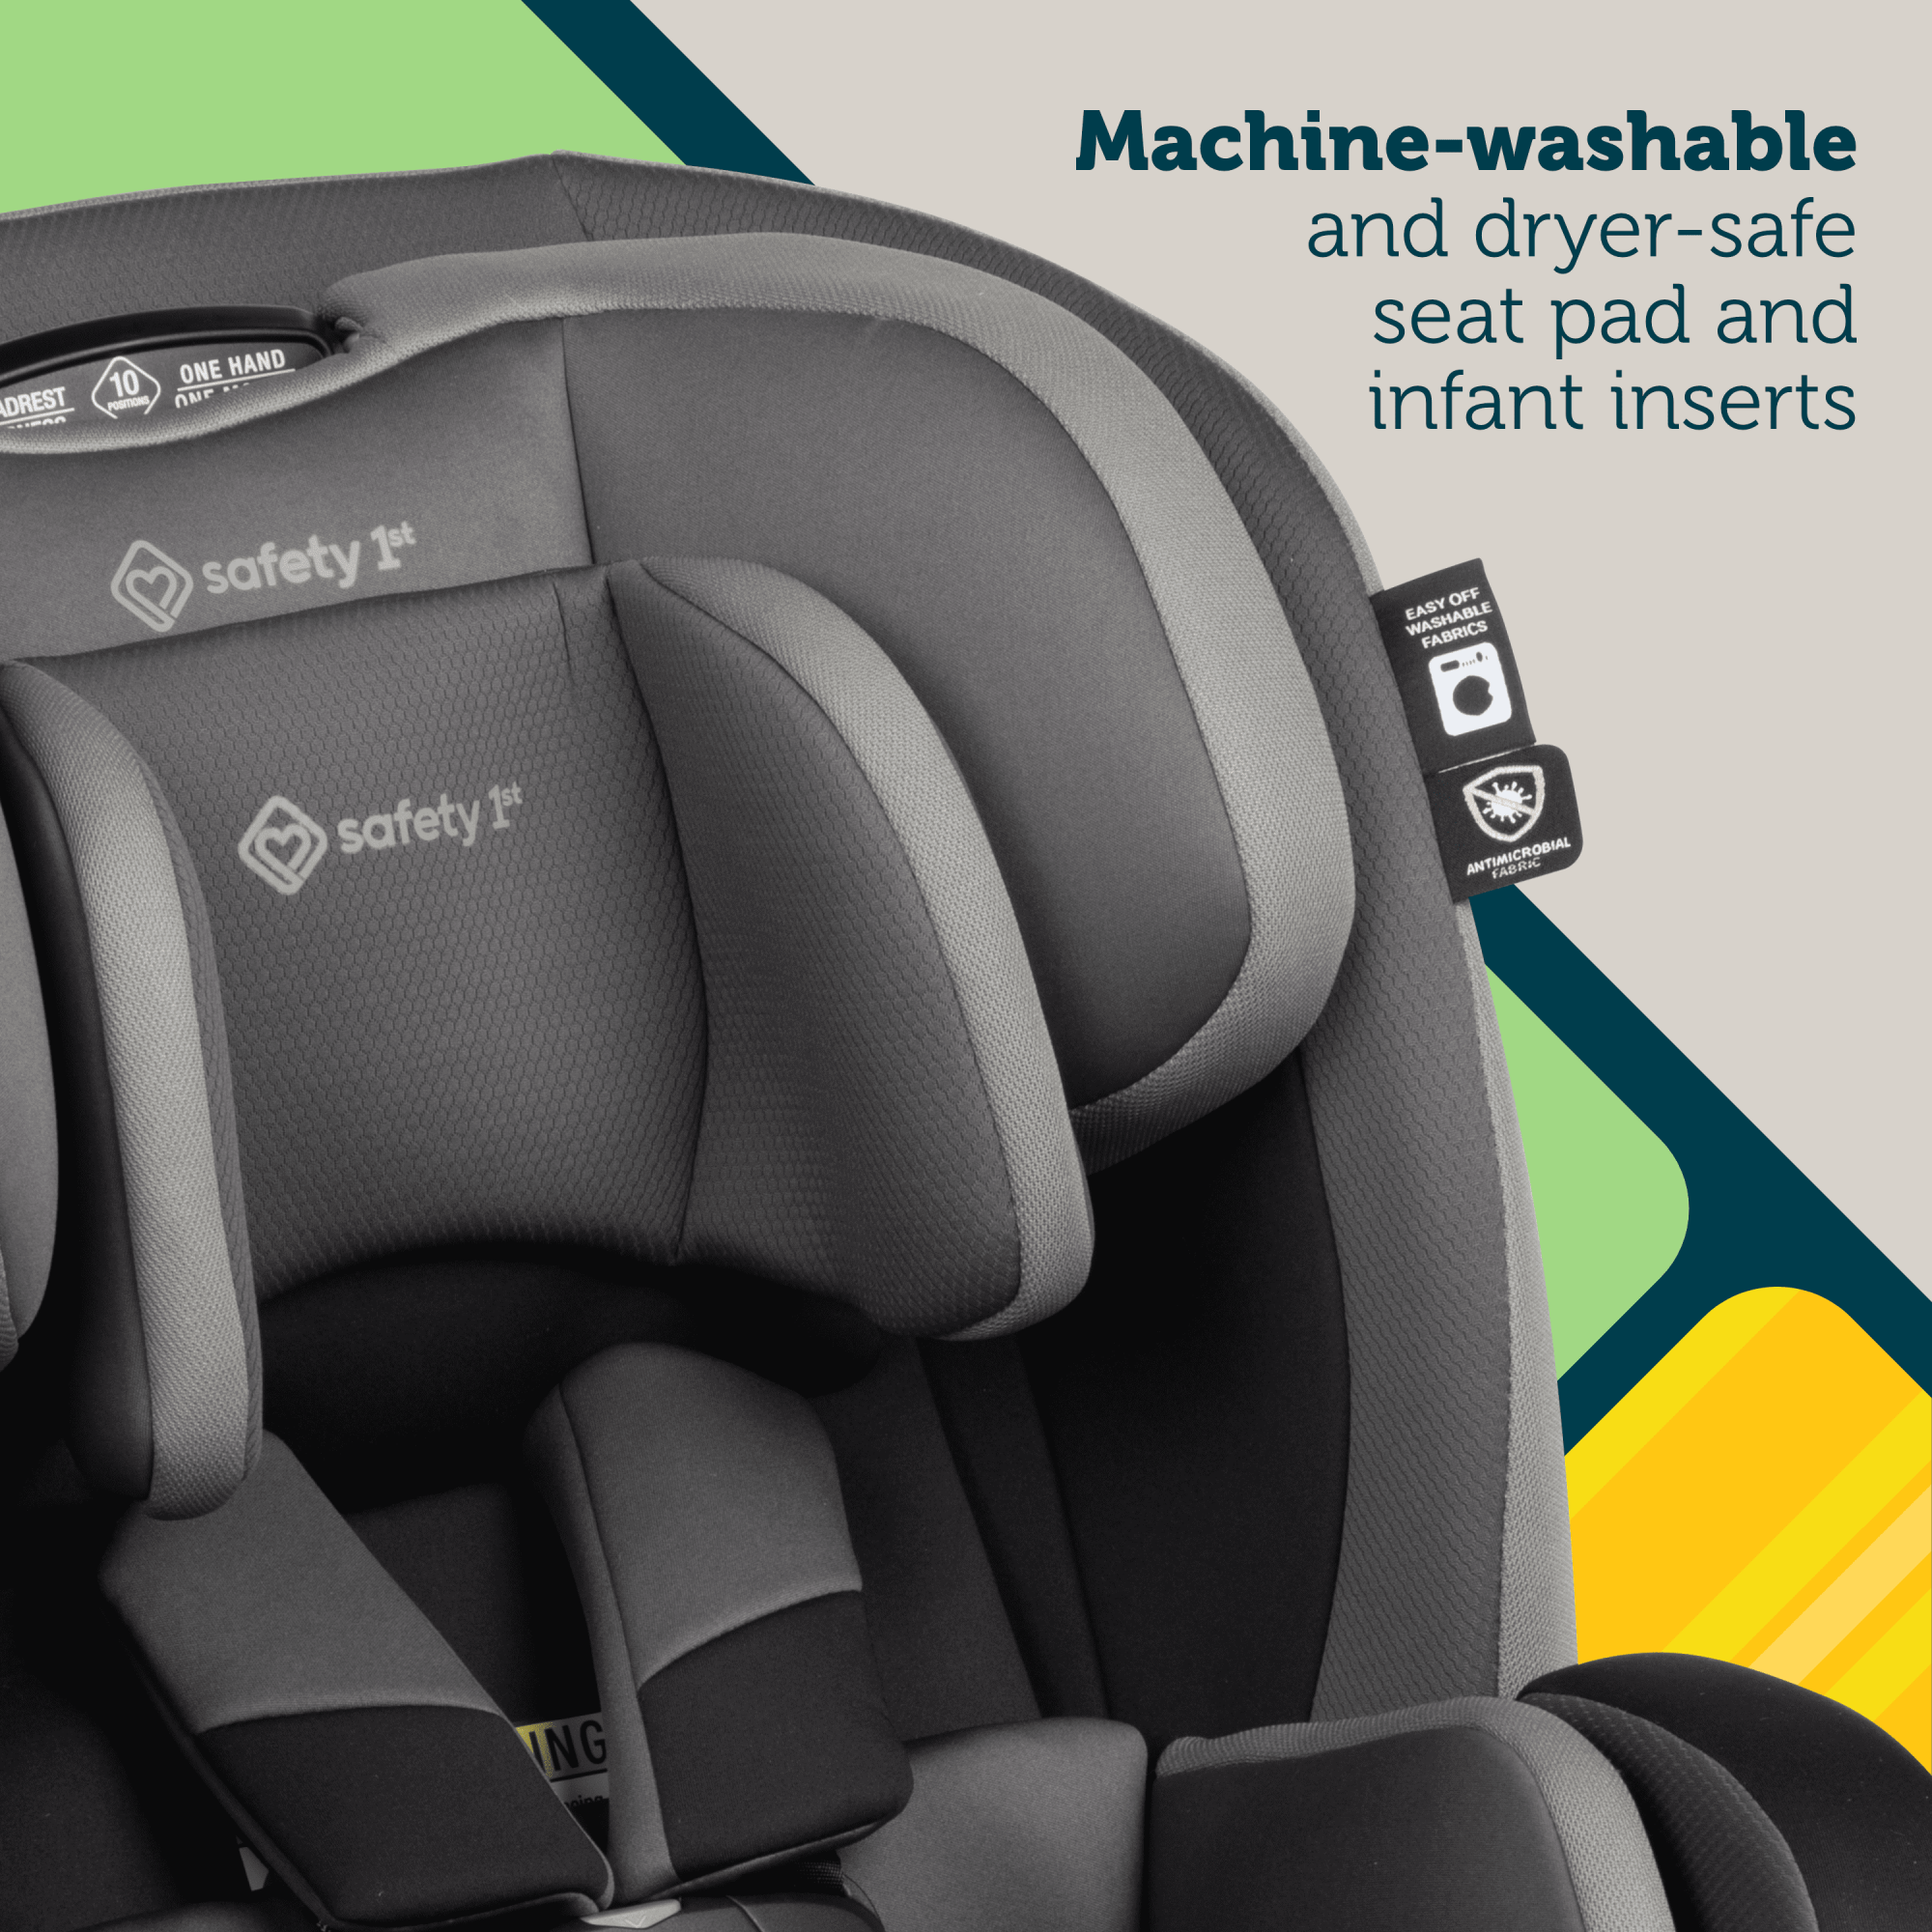 EverSlim 4-Mode All-in-One Convertible Car Seat - seat cushion is made of comfy memory-foam